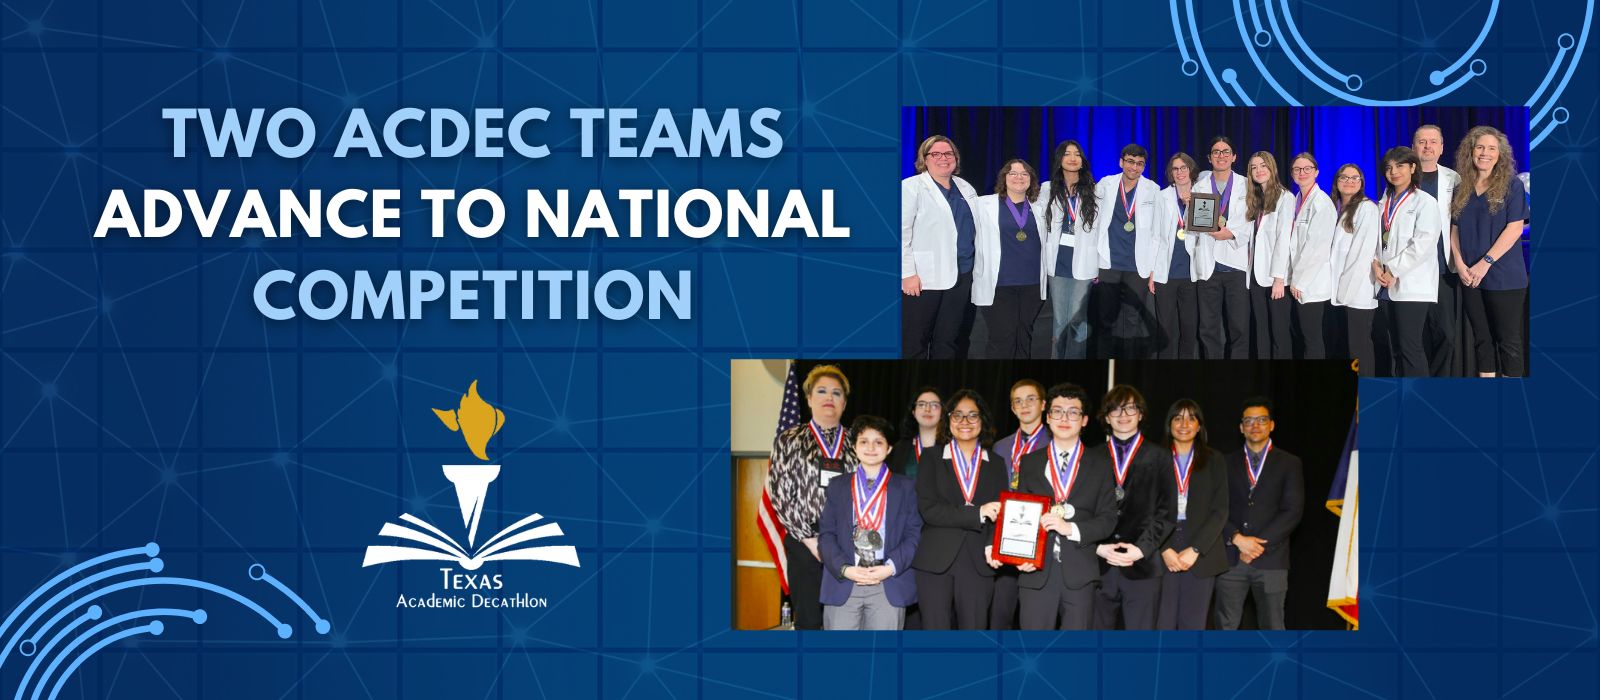 Two AcDec teams advance to national competition